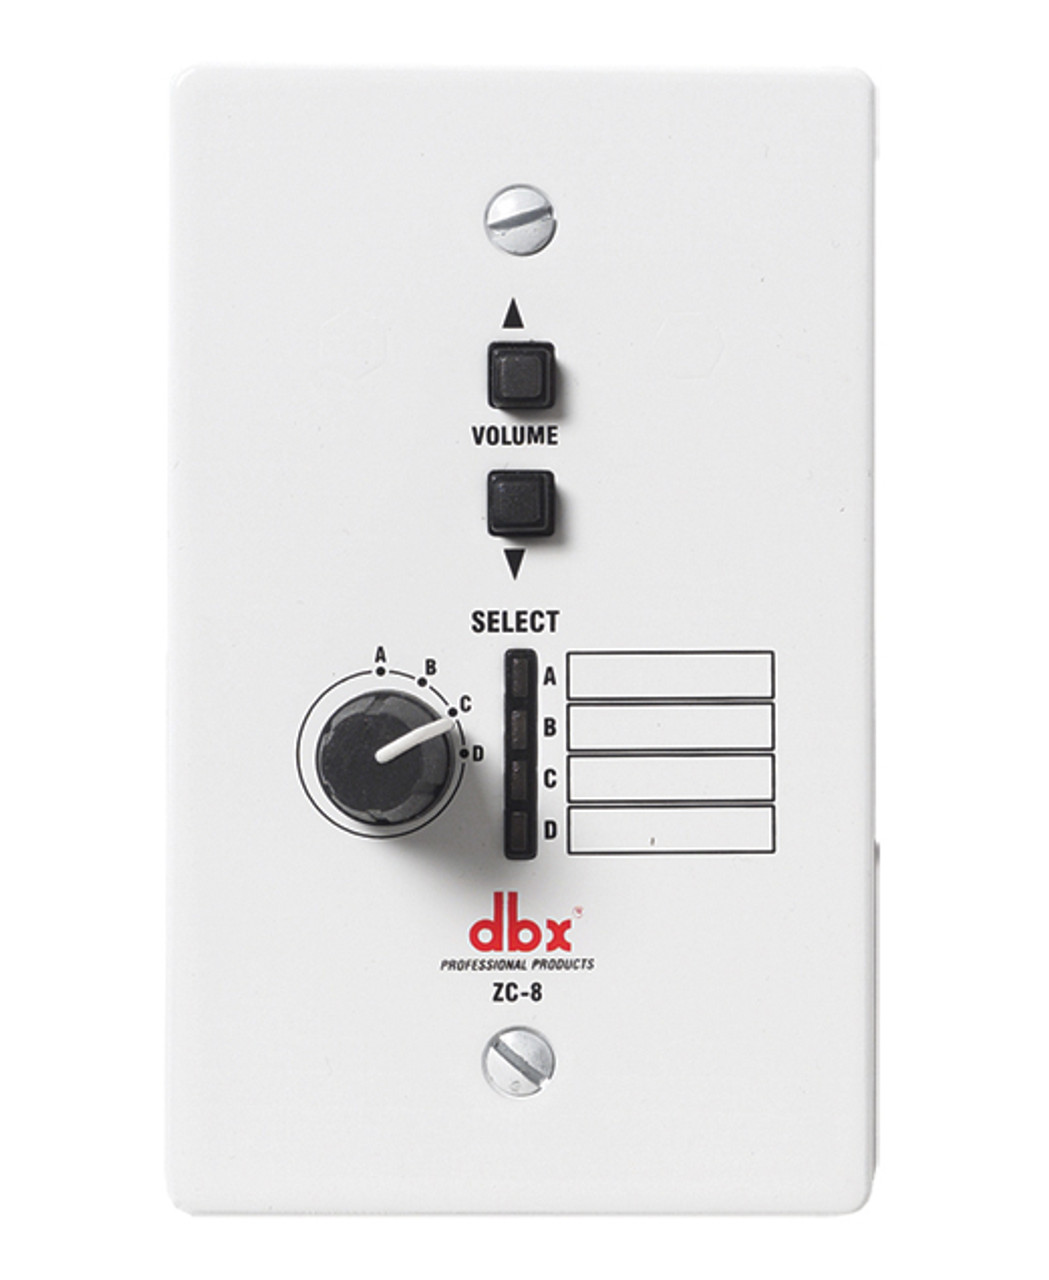 DBX DBXZC8V Eight Wall Mounted Up/Down Volume Controller 